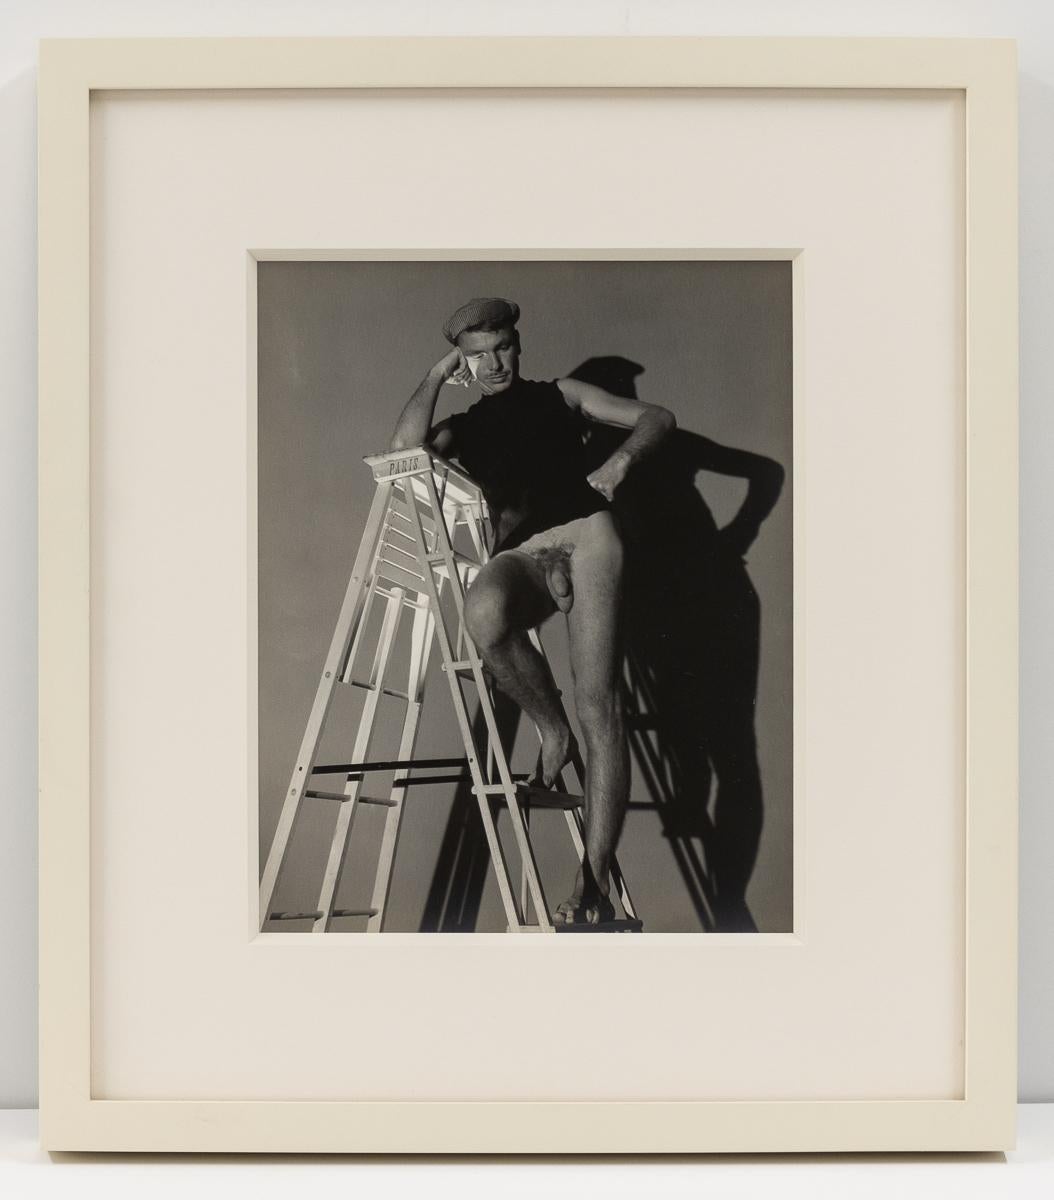 Jared French on Ladder - Contemporary Photograph by George Platt Lynes